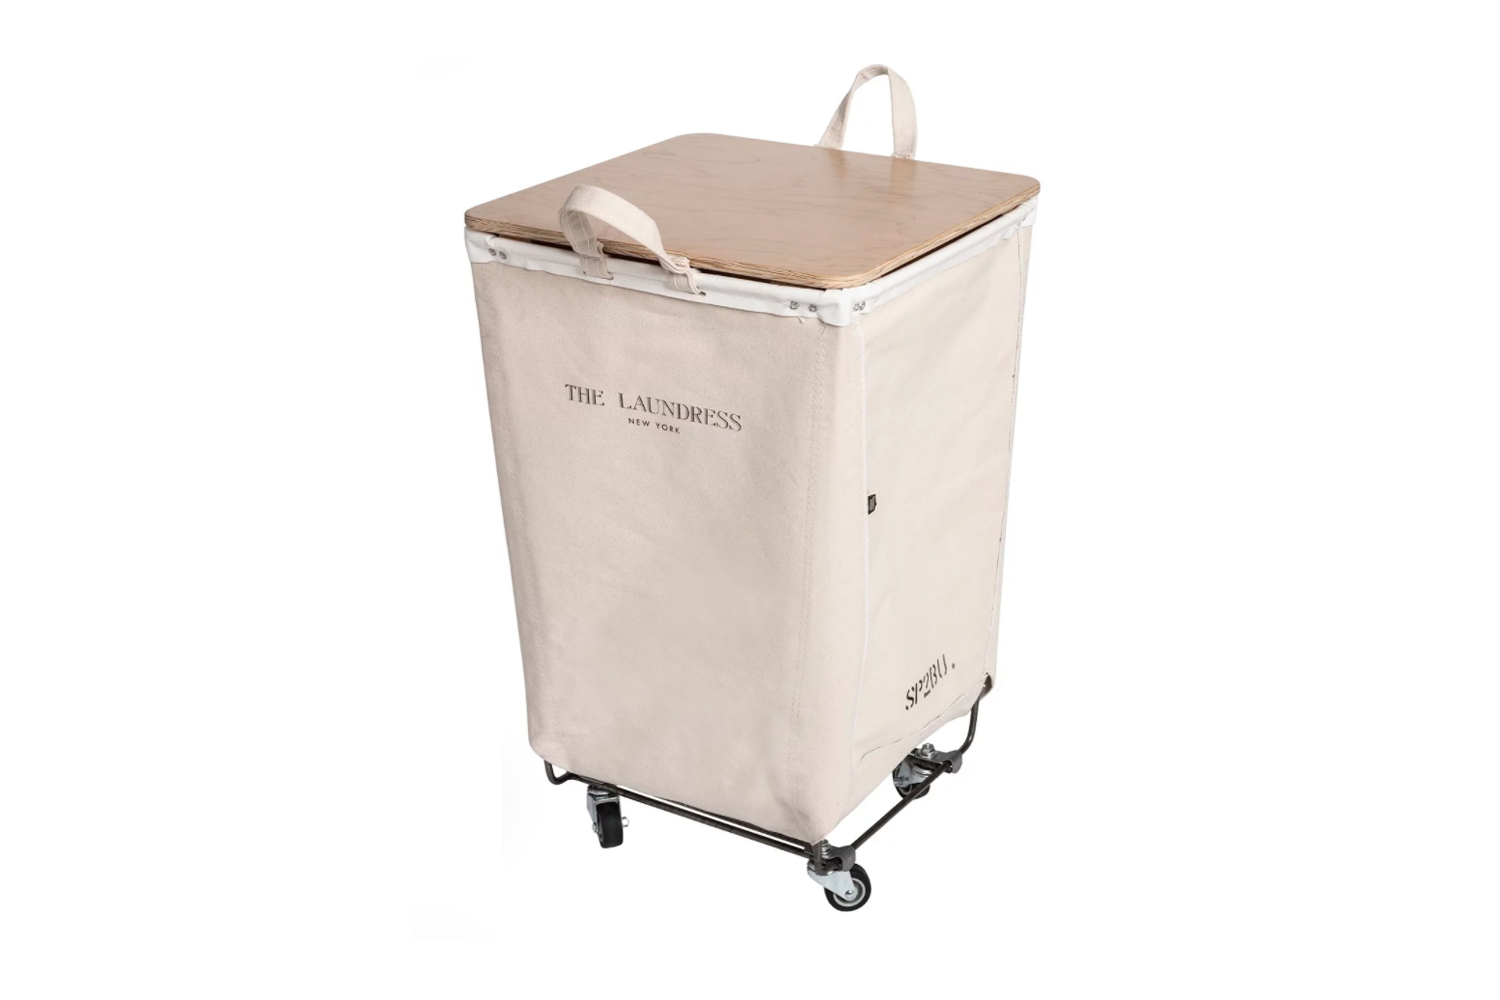 a riff off the steele classic, the laundress steele canvas single hamper with f 12